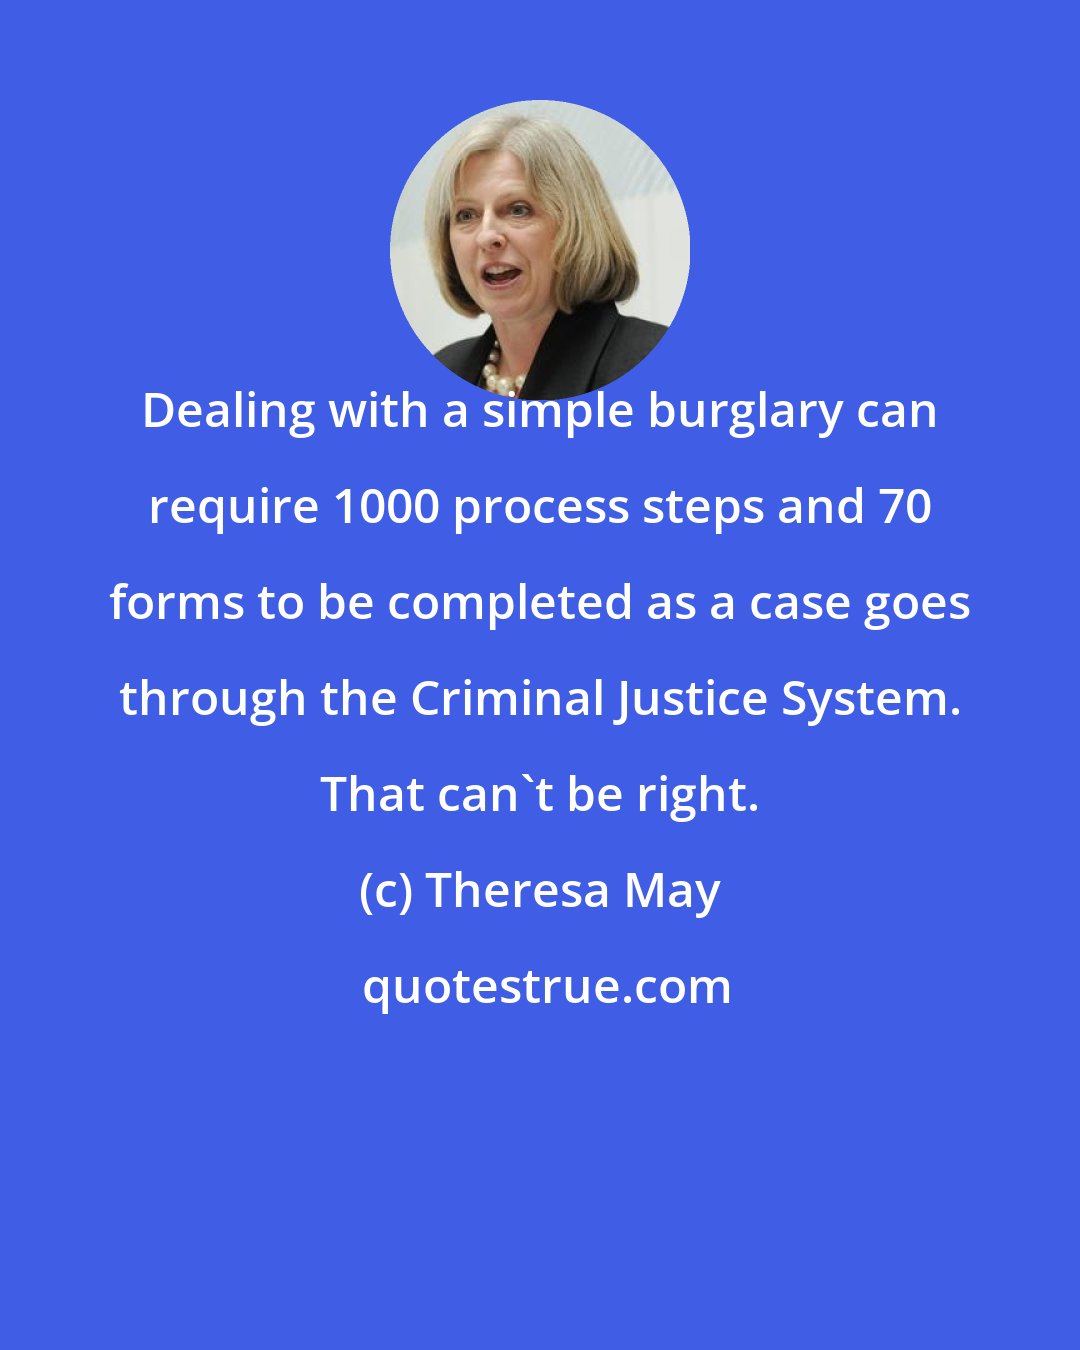 Theresa May: Dealing with a simple burglary can require 1000 process steps and 70 forms to be completed as a case goes through the Criminal Justice System. That can't be right.